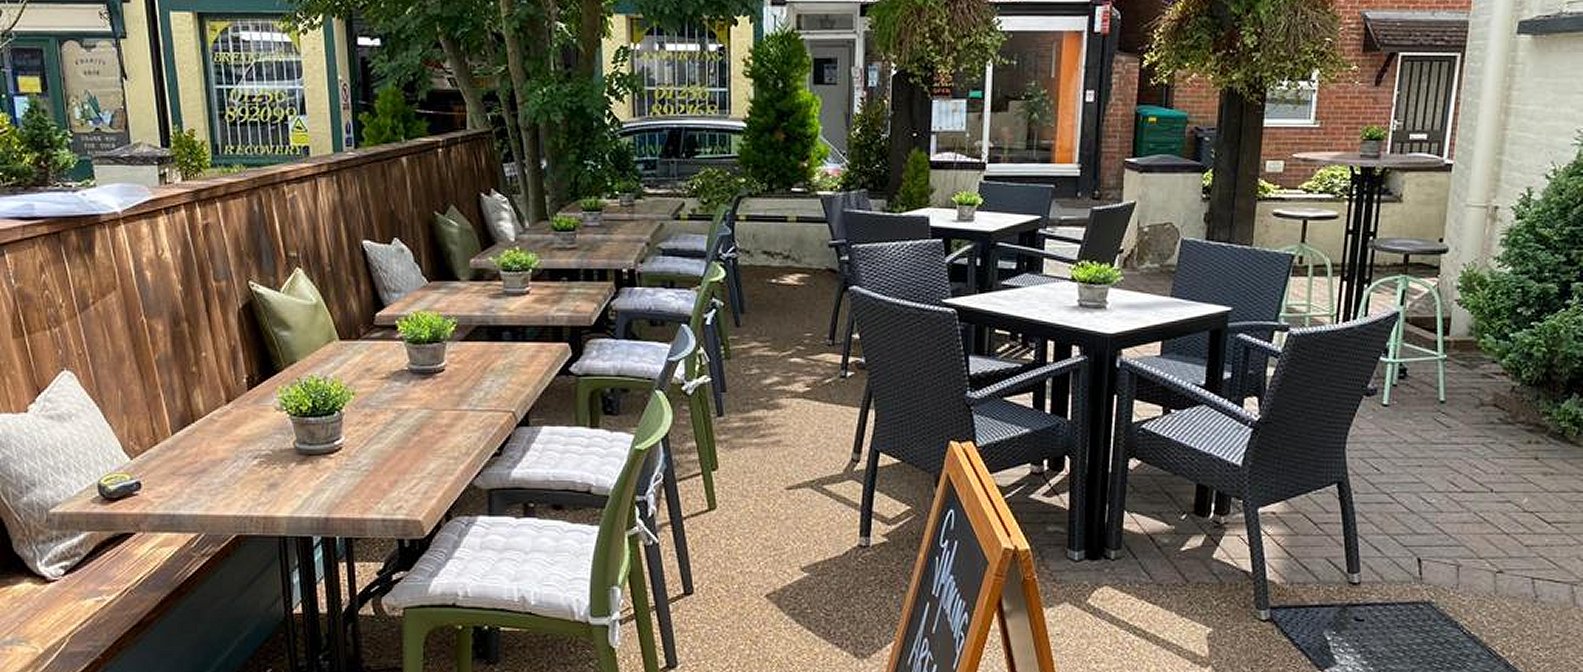 New terrace at The White Hart Hotel & Restaurant Whitchurch accommodation/bed-and-breakfast/pub food Newbury